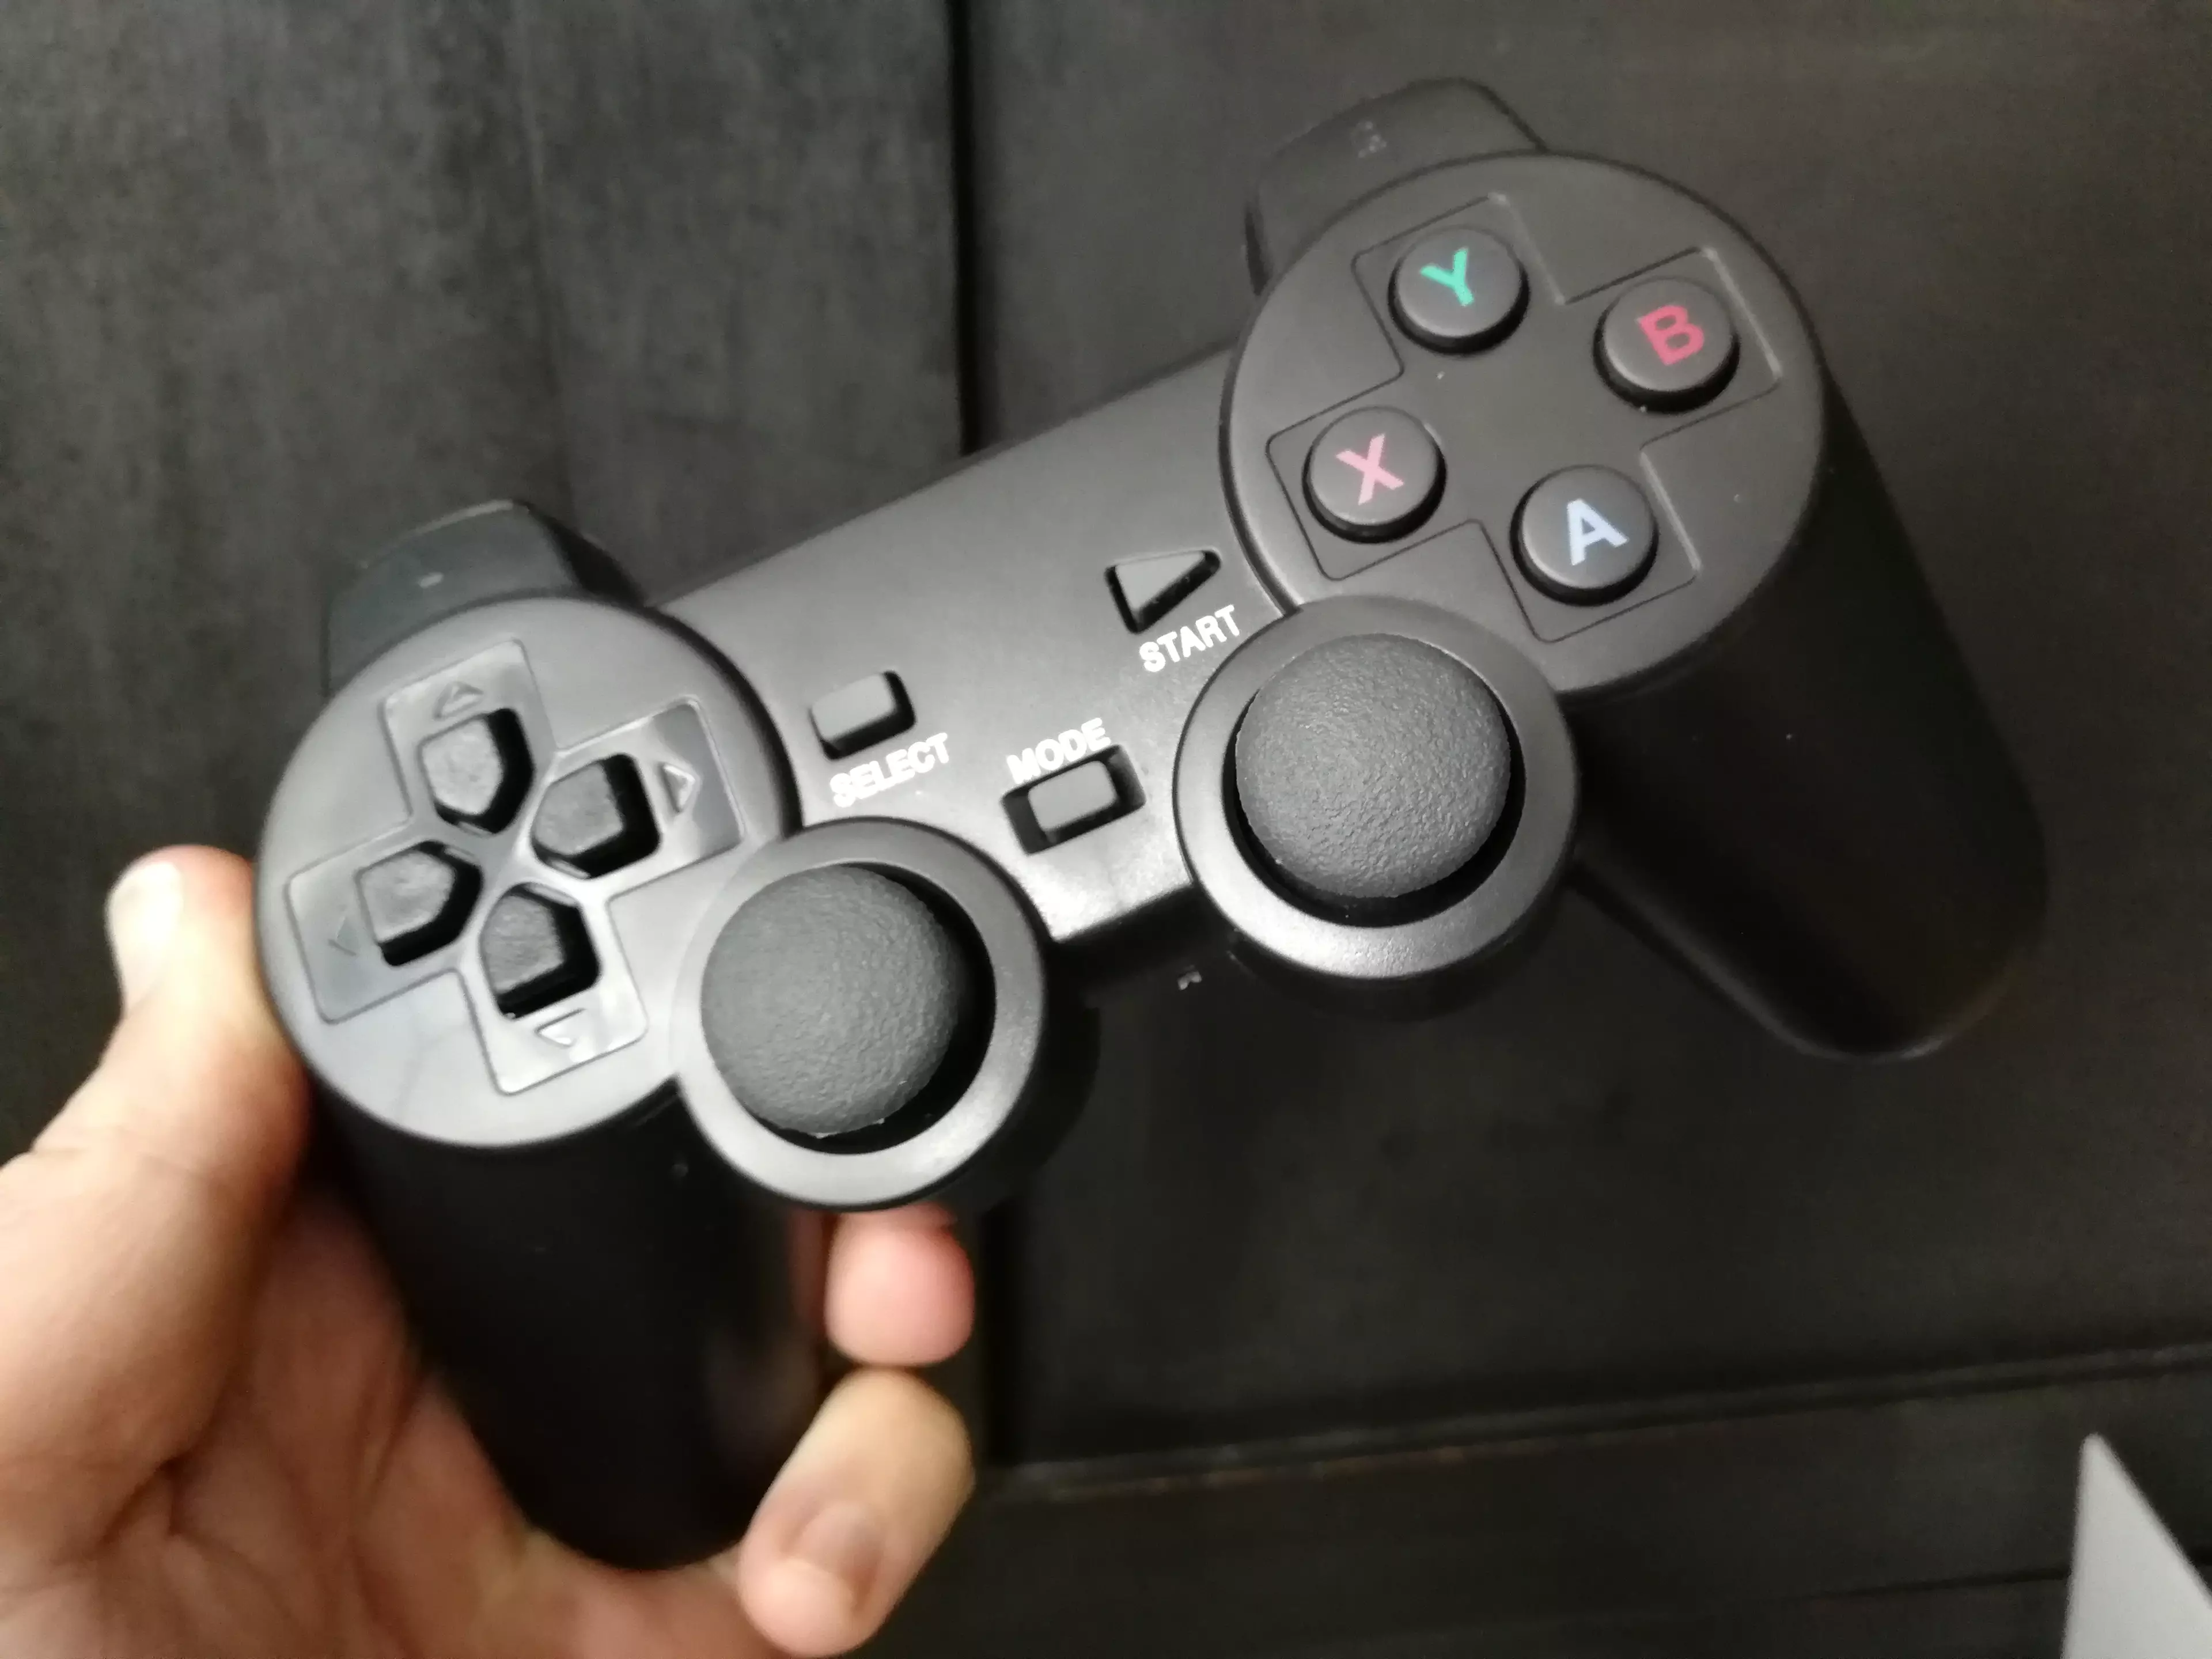 This is the boxed-in controller. You will want to bin it immediately, and use literally anything else.